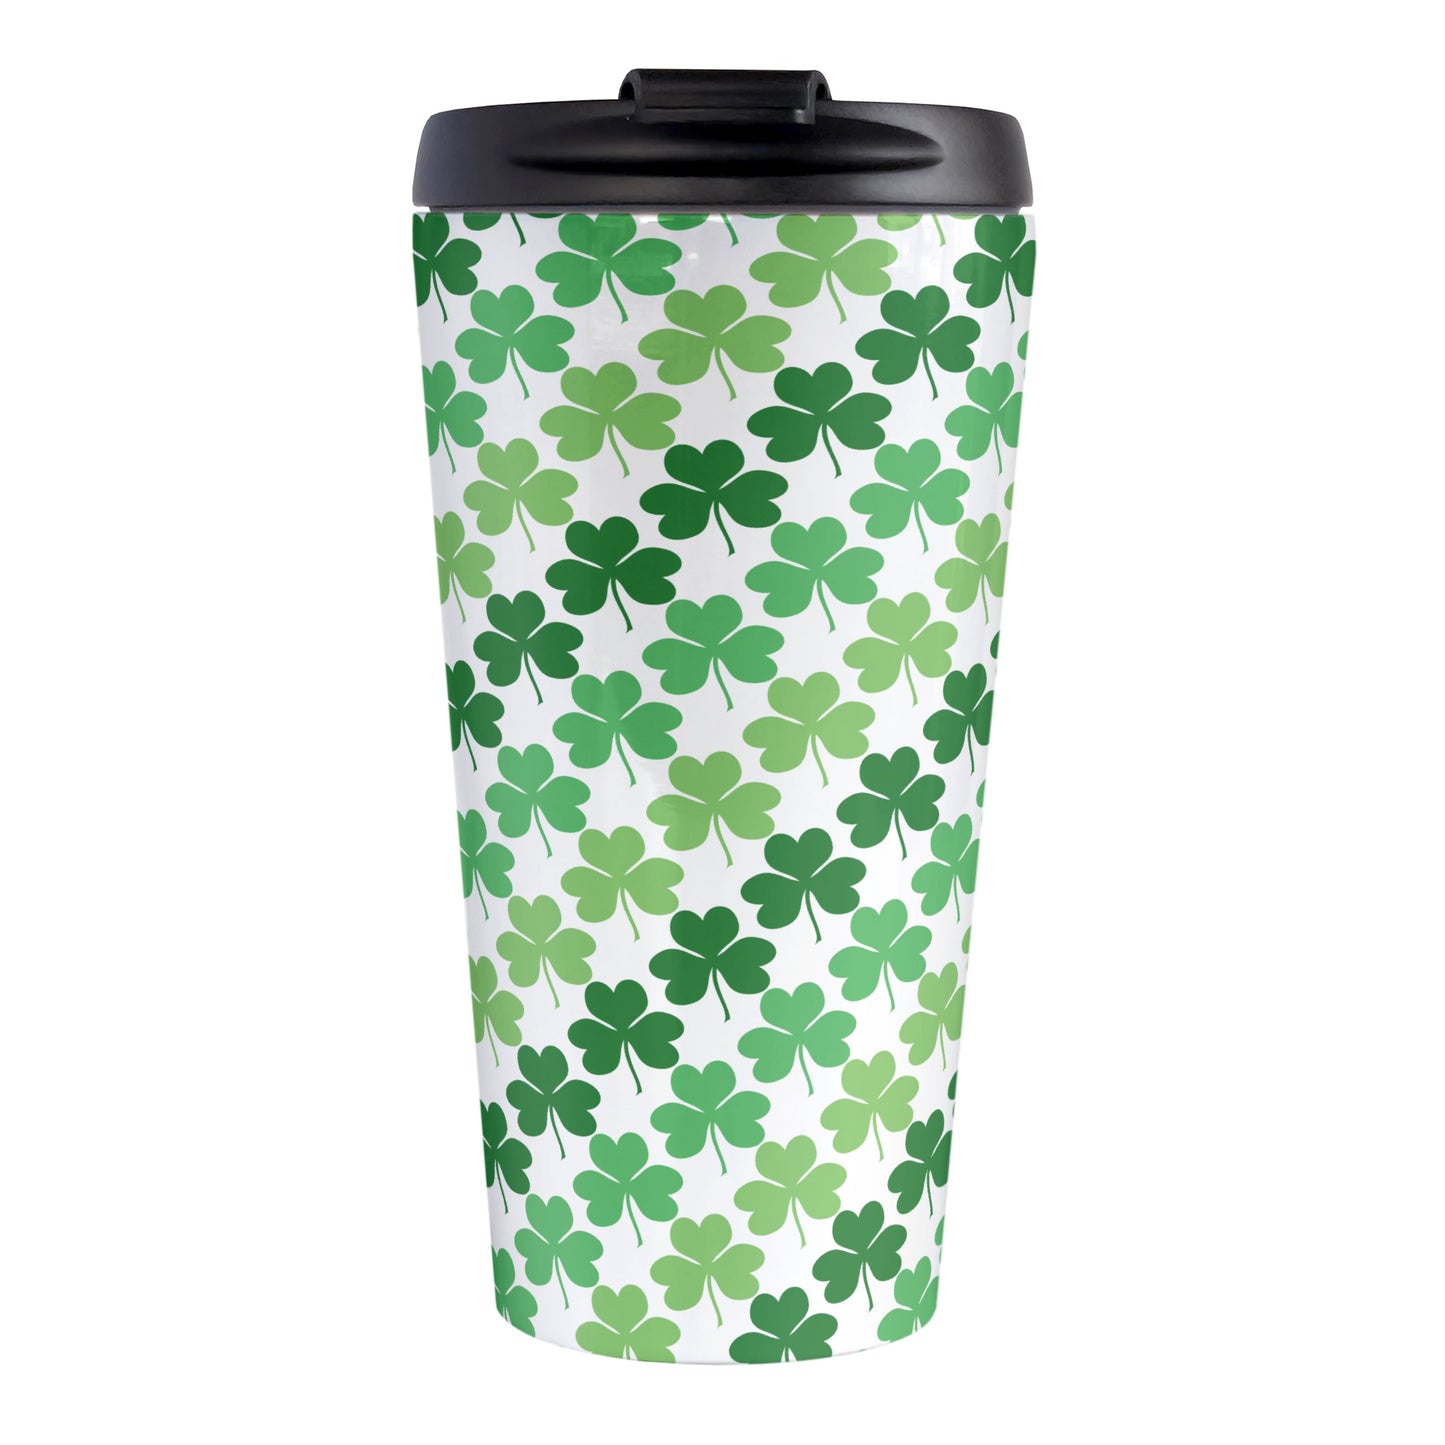 Green Clovers Travel Mug (15oz, stainless steel insulated) at Amy's Coffee Mugs